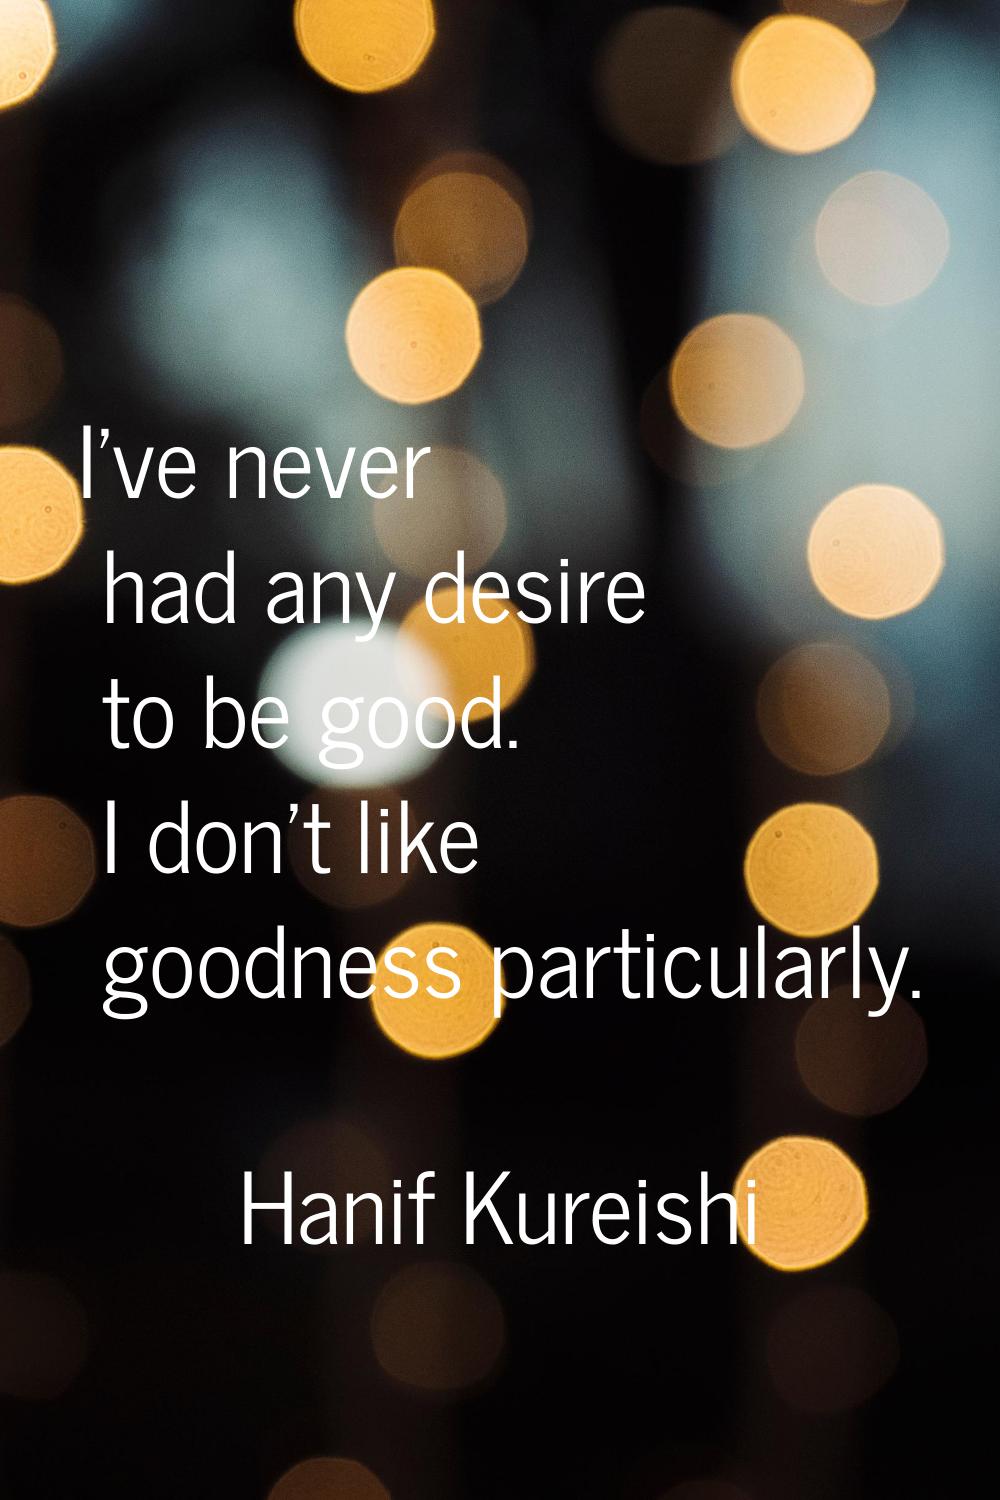 I've never had any desire to be good. I don't like goodness particularly.